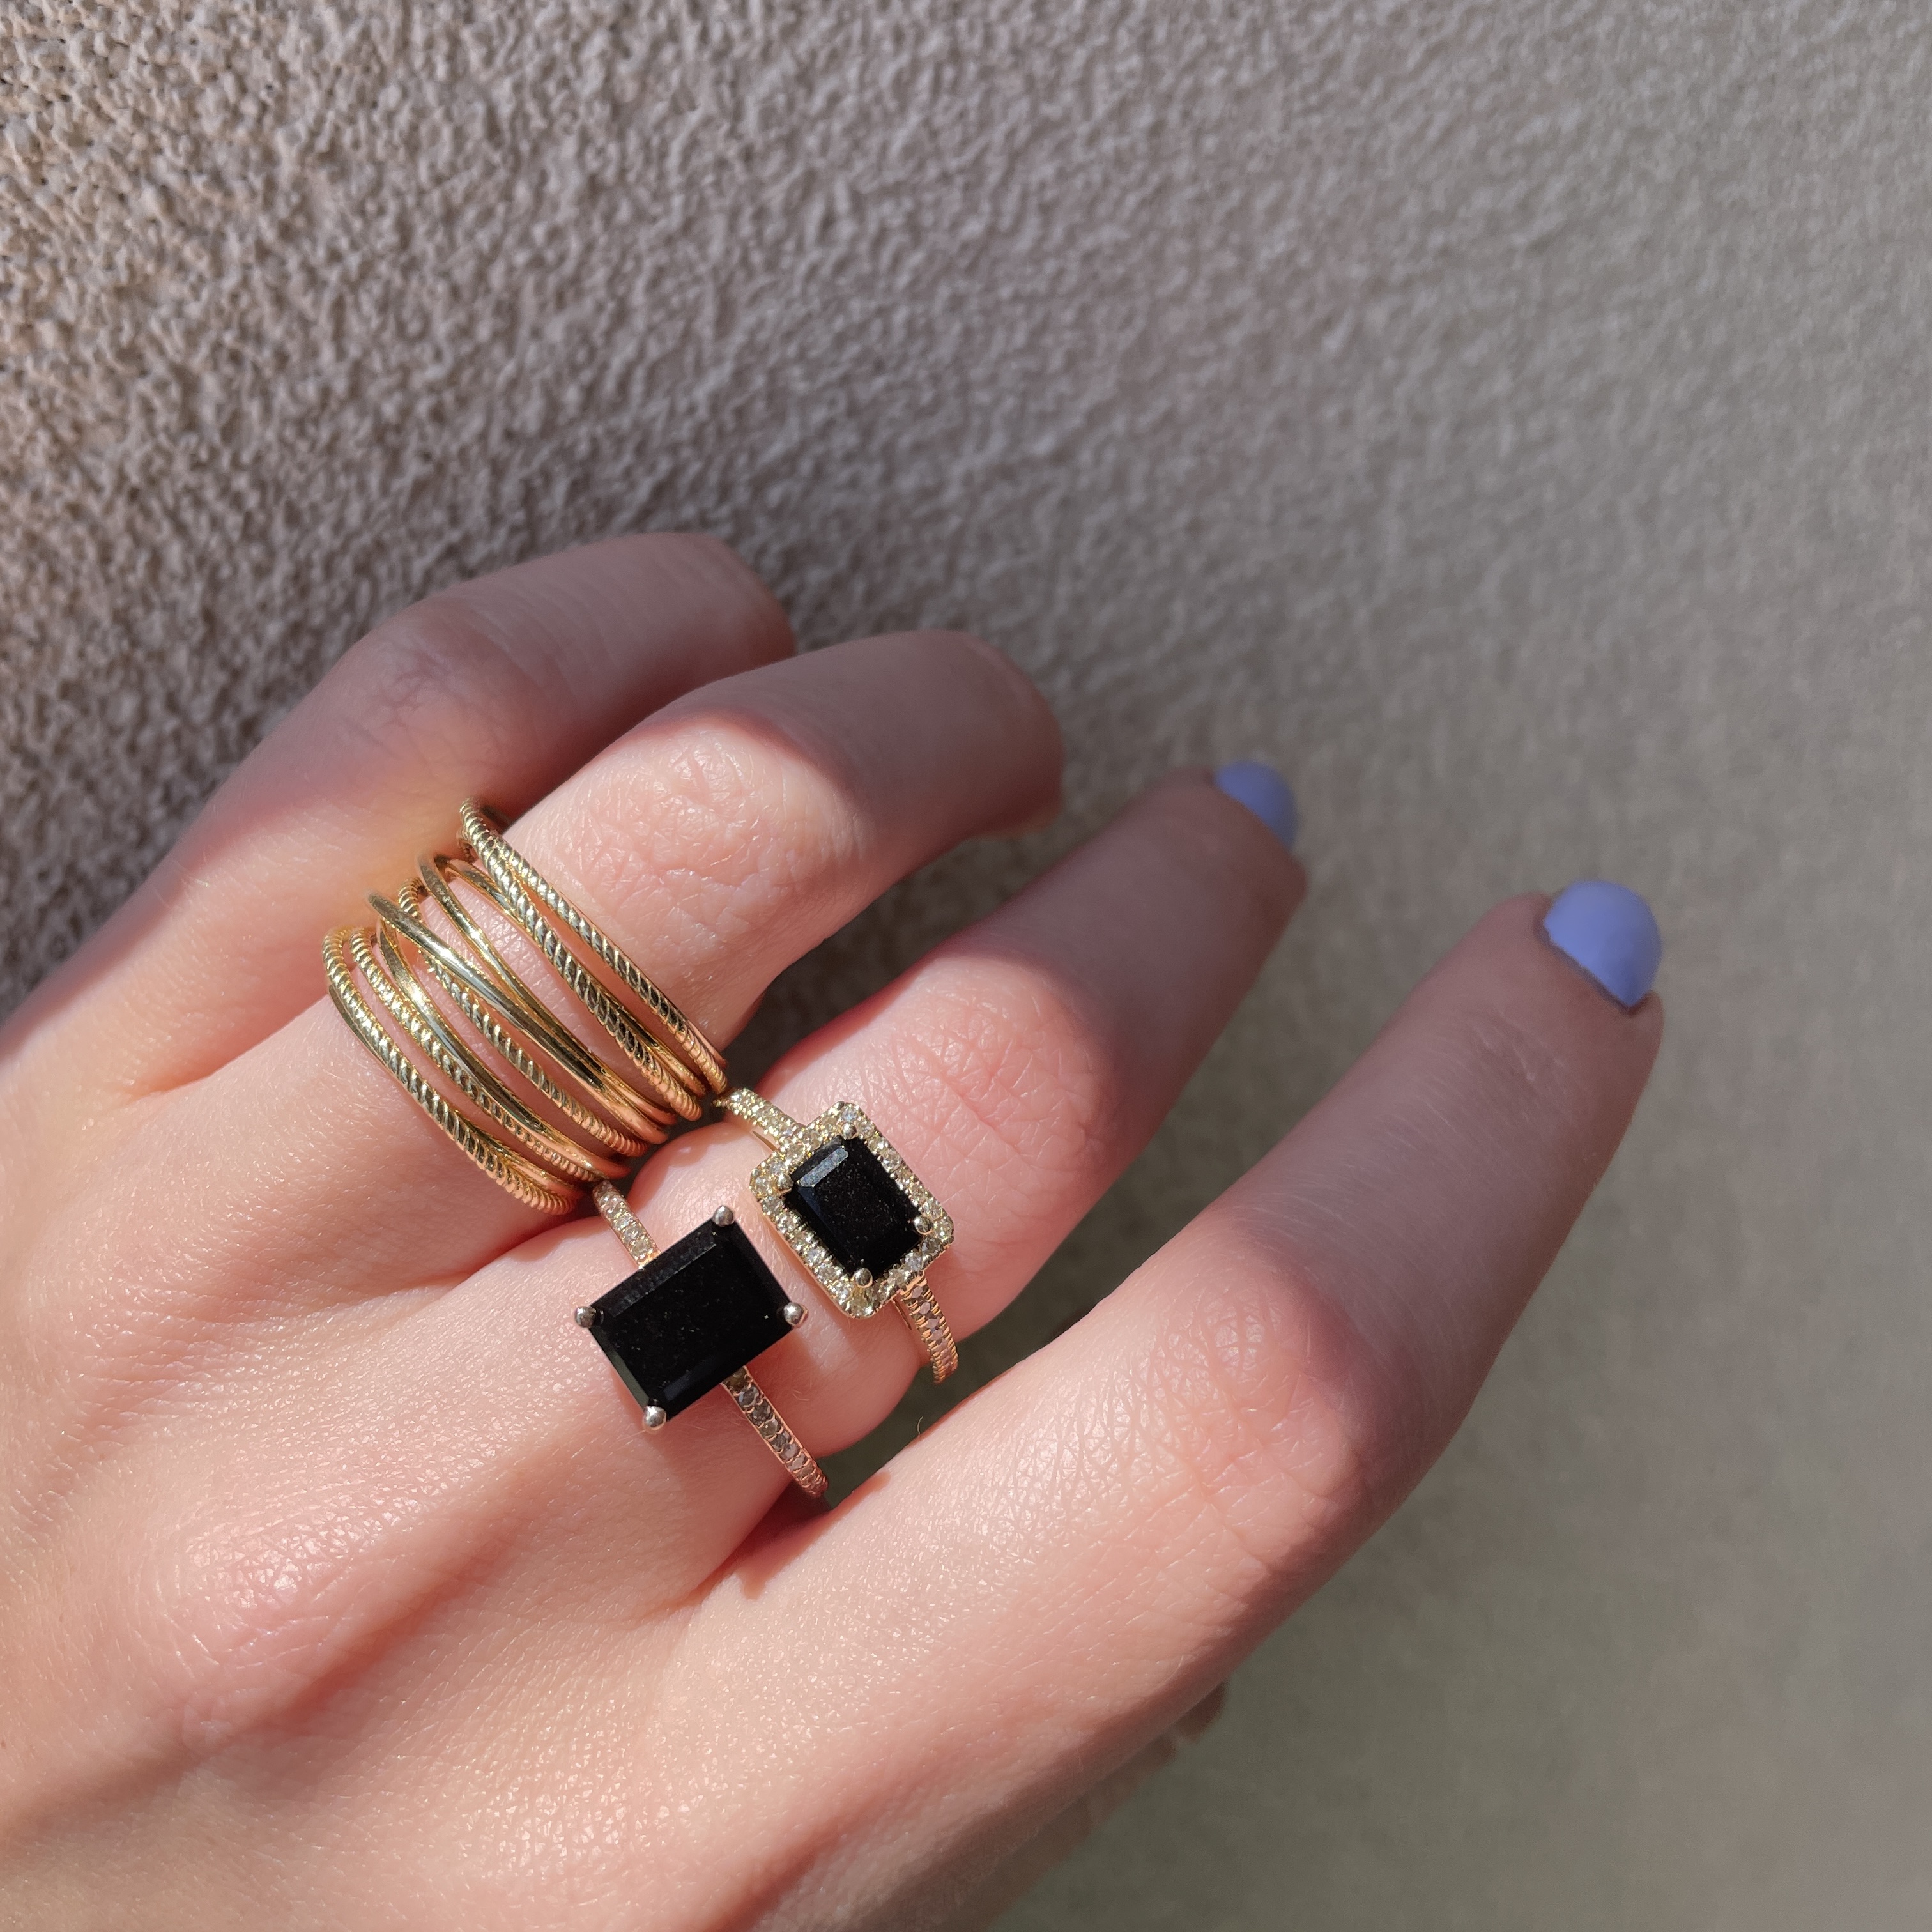 Rose Gold Onyx and Diamond Ring